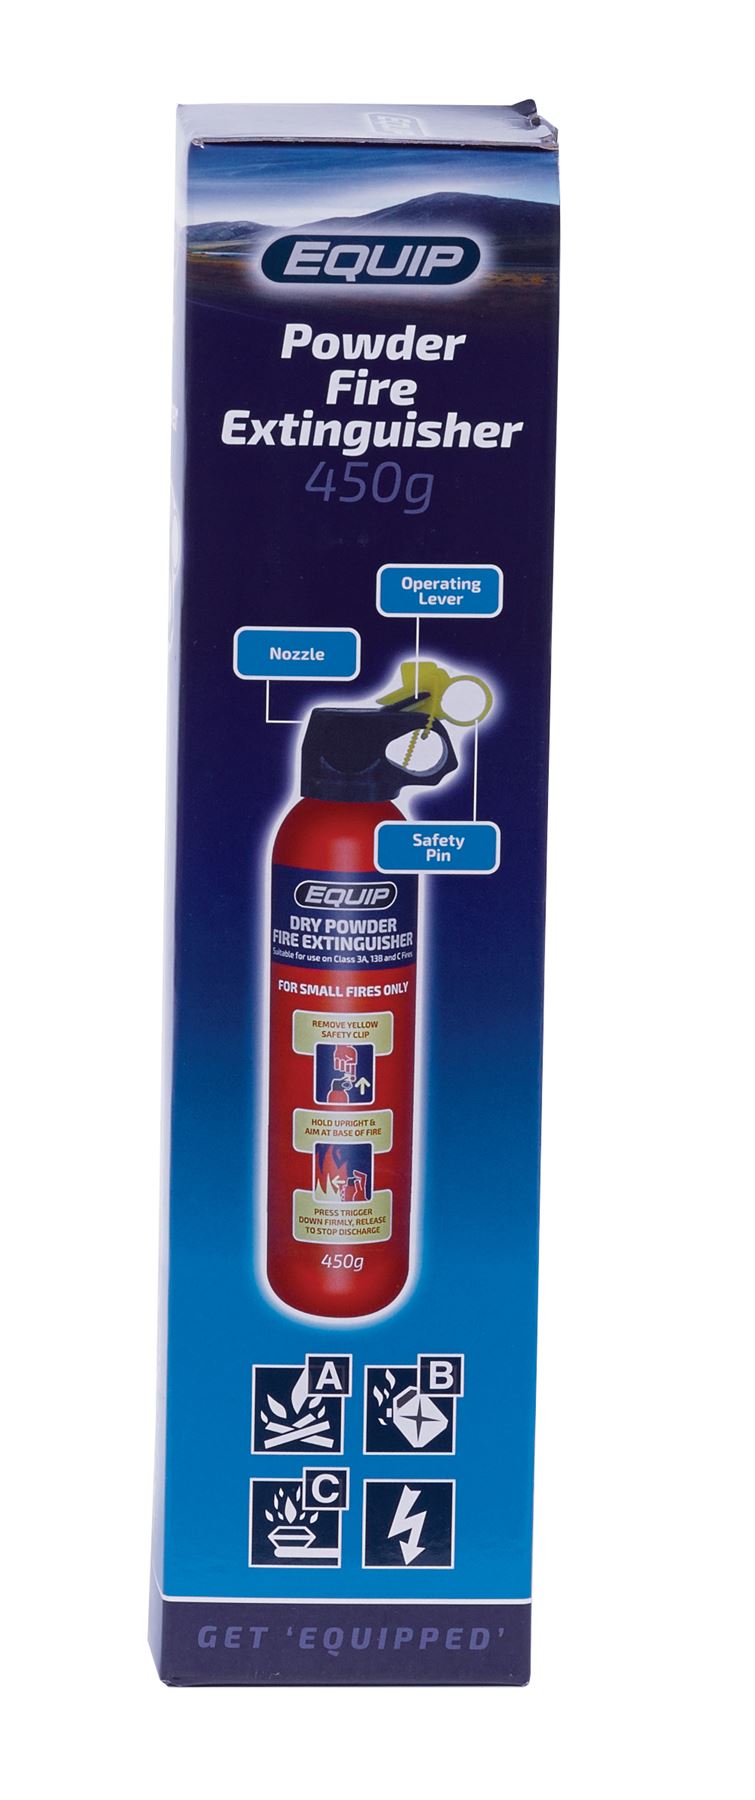 Equip Dry Chemical Powder Fire Extinguisher - 450g